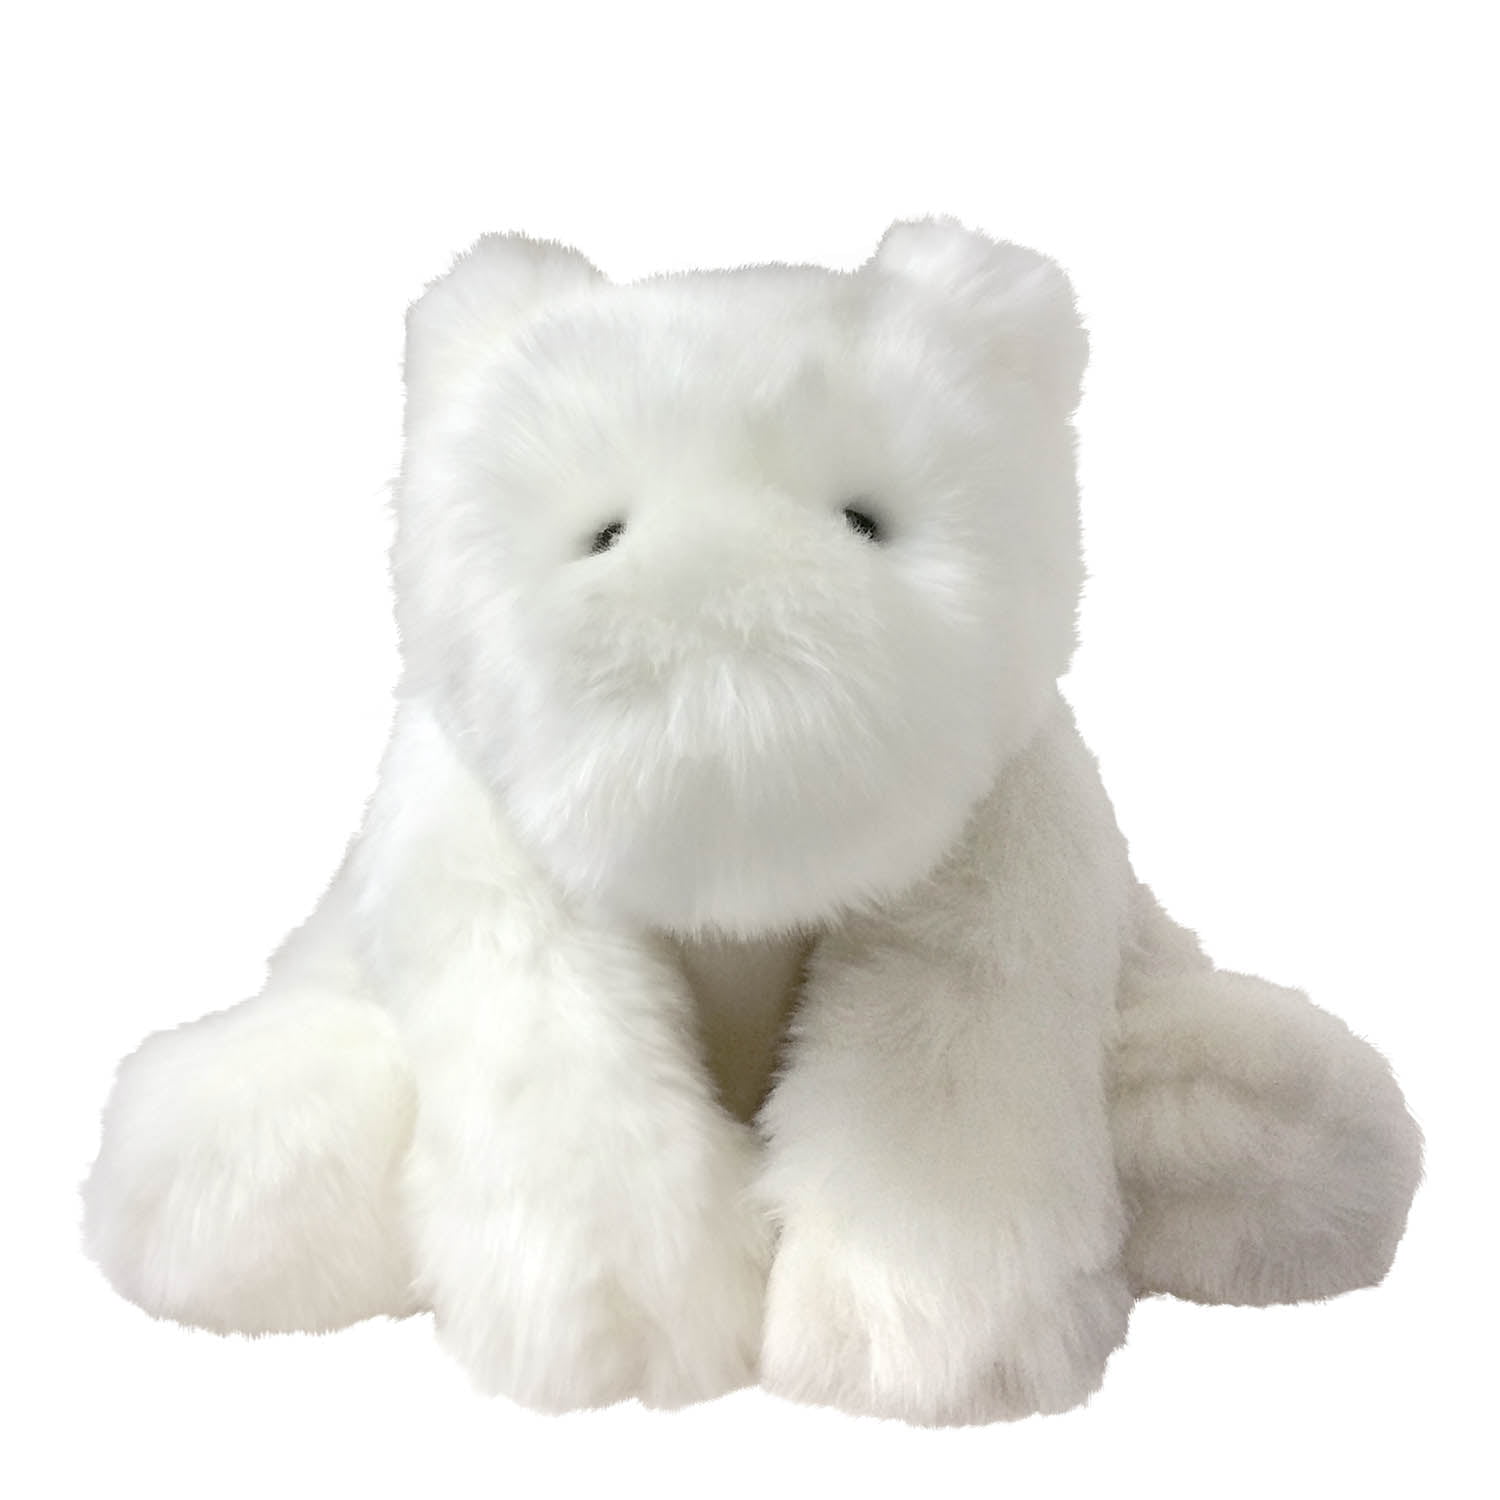 The Manhattan Toy Company Crouching Bunny Stuffed Animal Luxe White 